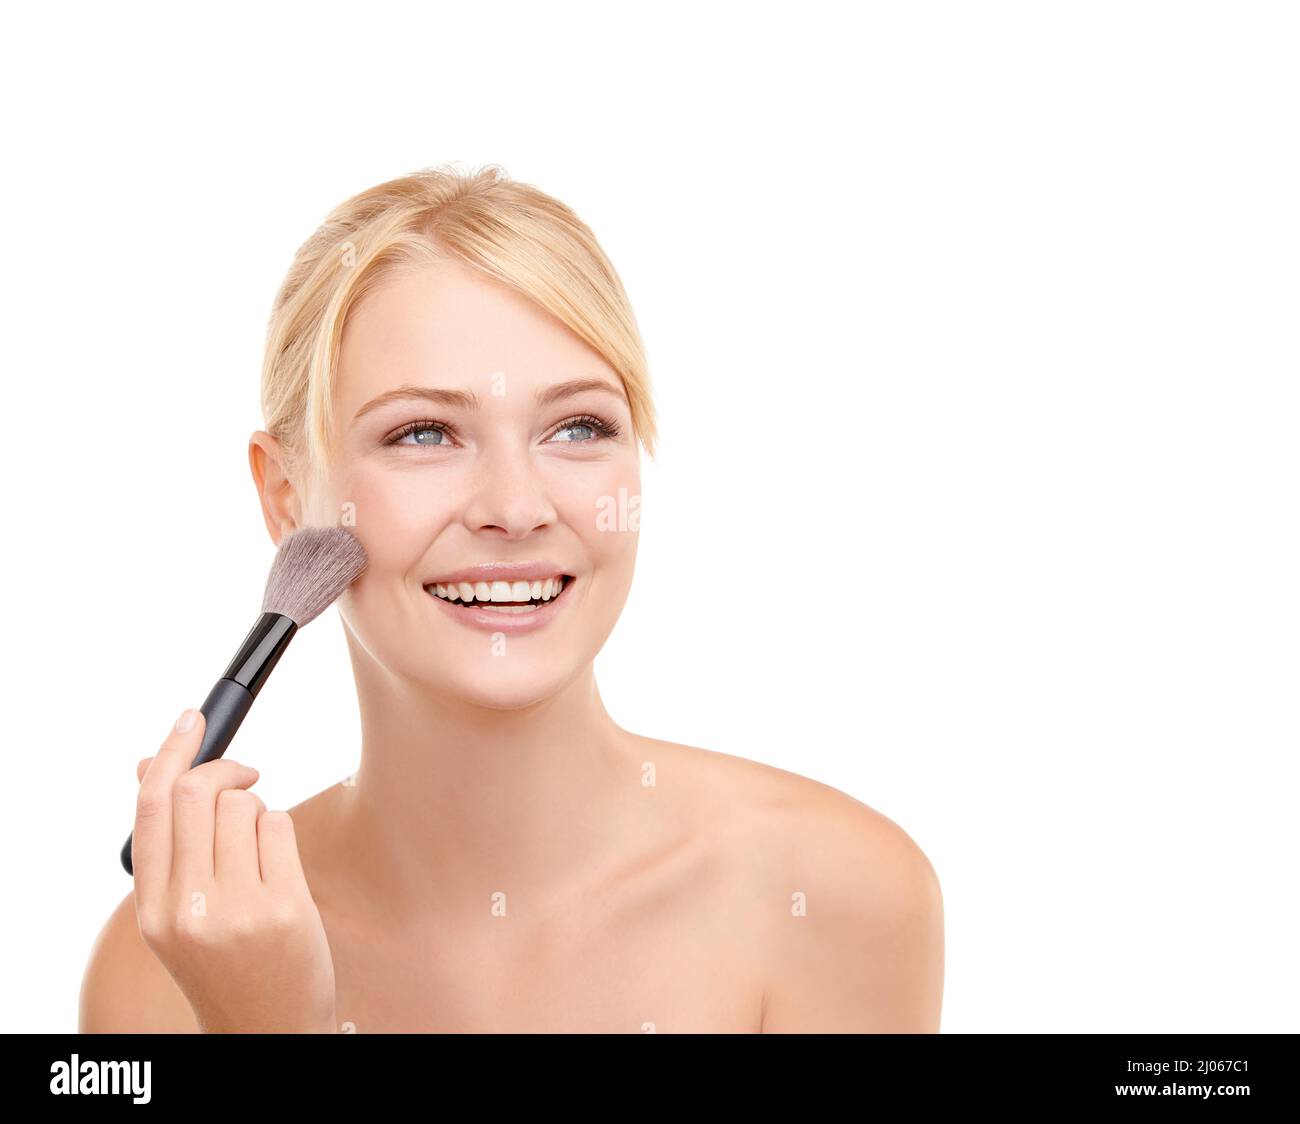 Youre making me blush. A young woman applying make-up to her face isolated on white. Stock Photo